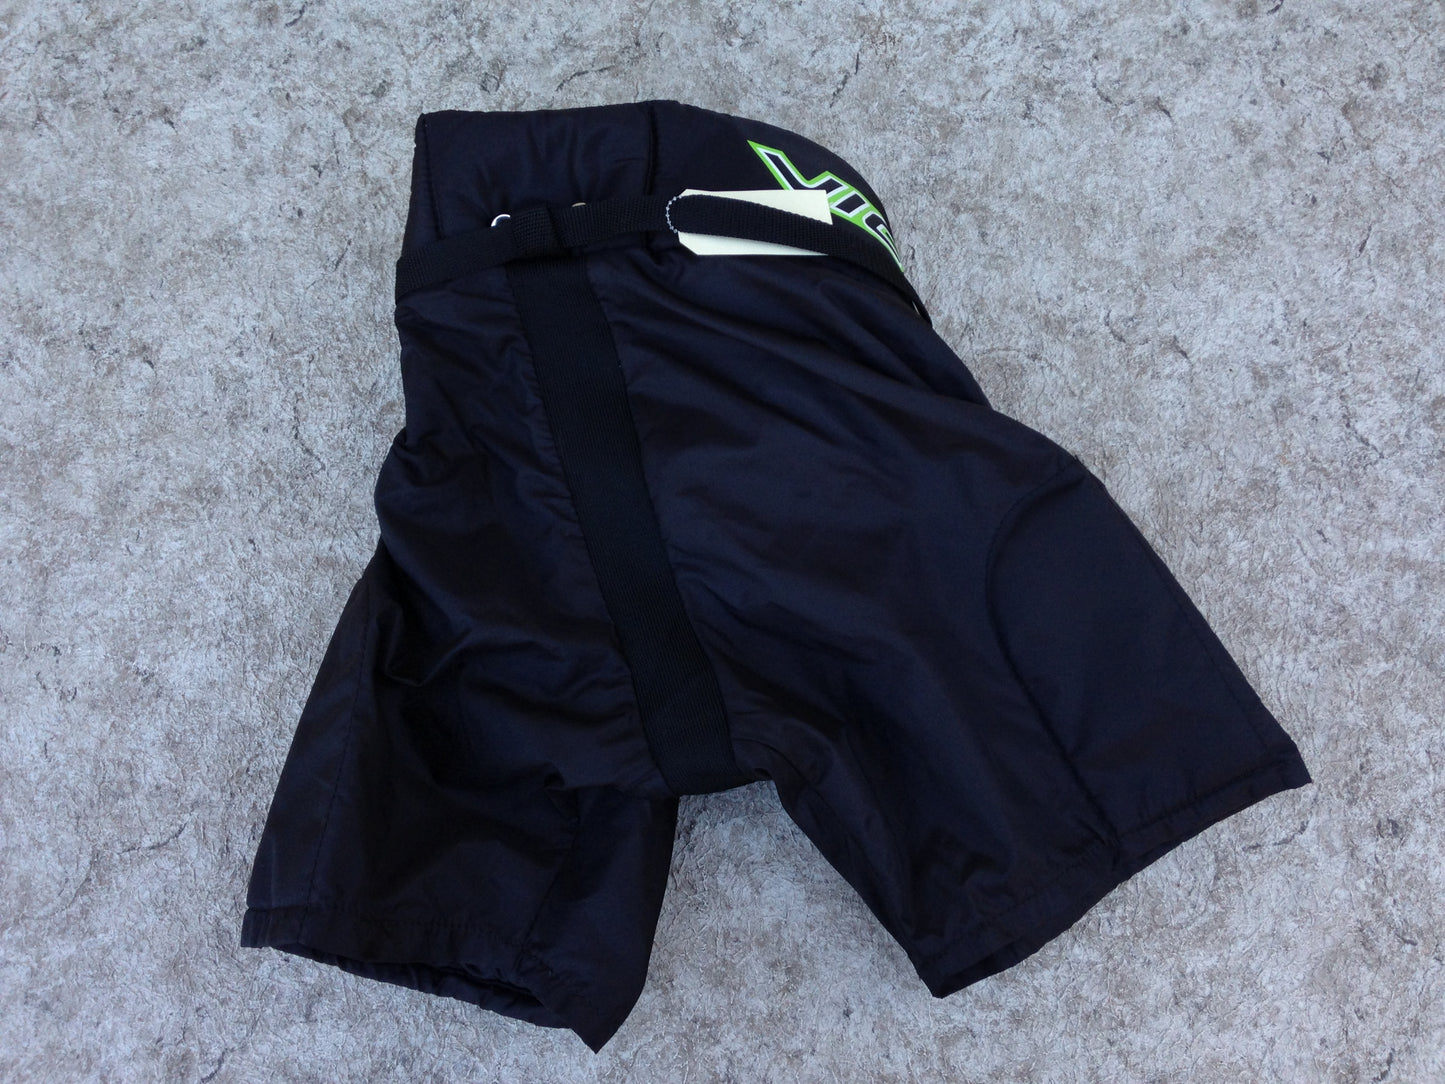 Hockey Pants Child Size Youth Large Vic Firestorm Black Lime Excellent